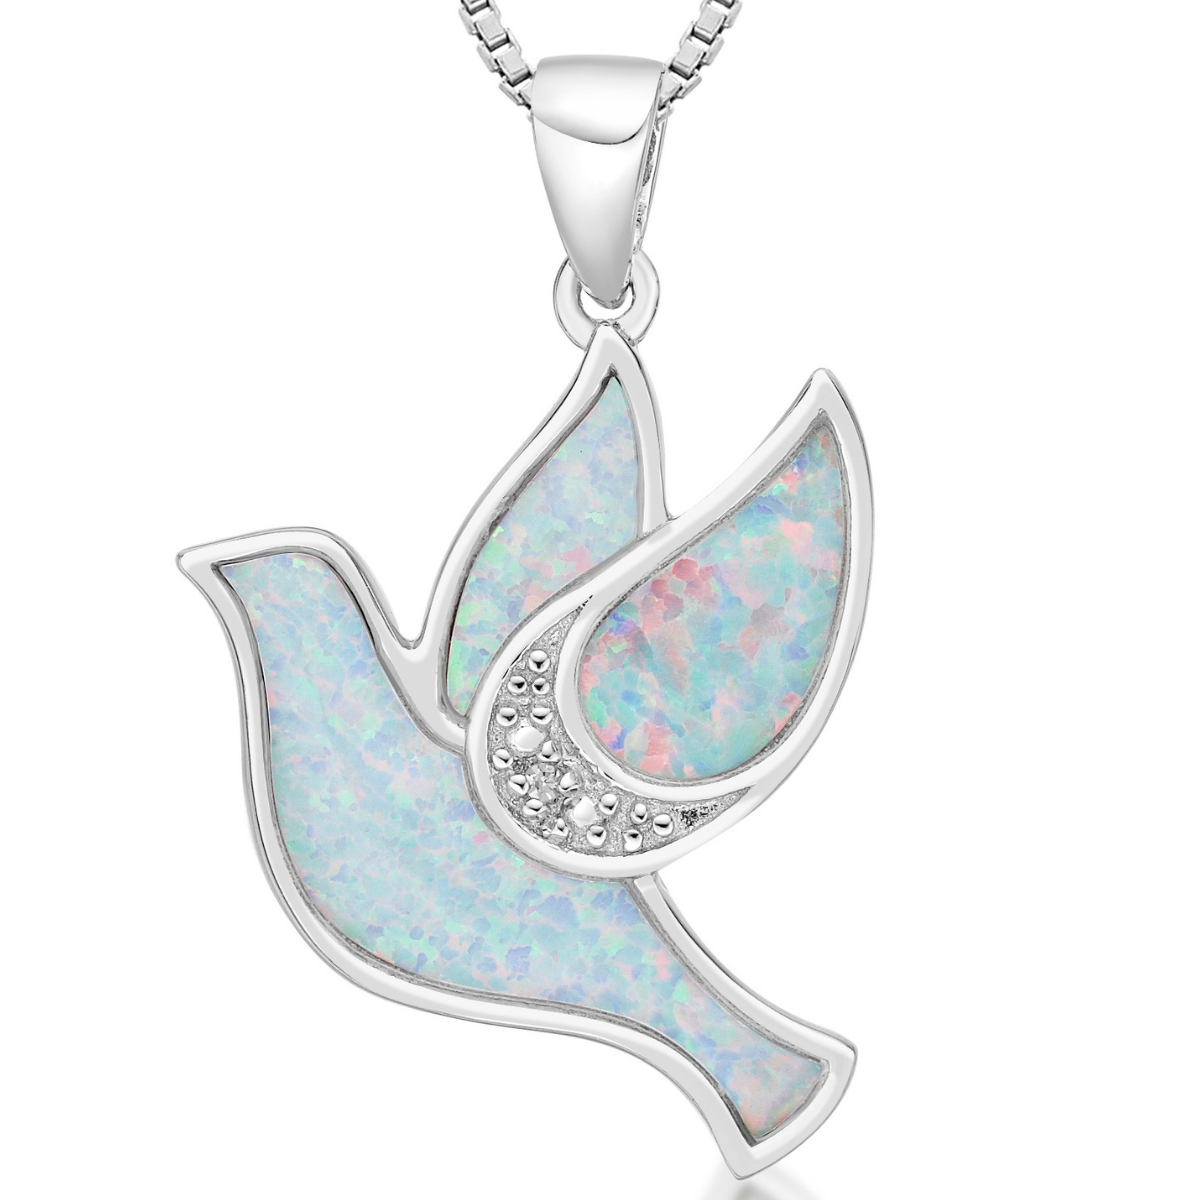 Lavari Jewelers Women's Created White Opal Dove Diamond Pendant with Lobster Clasp, Sterling Silver, .004 Cttw, 18 Inch Cable Chain